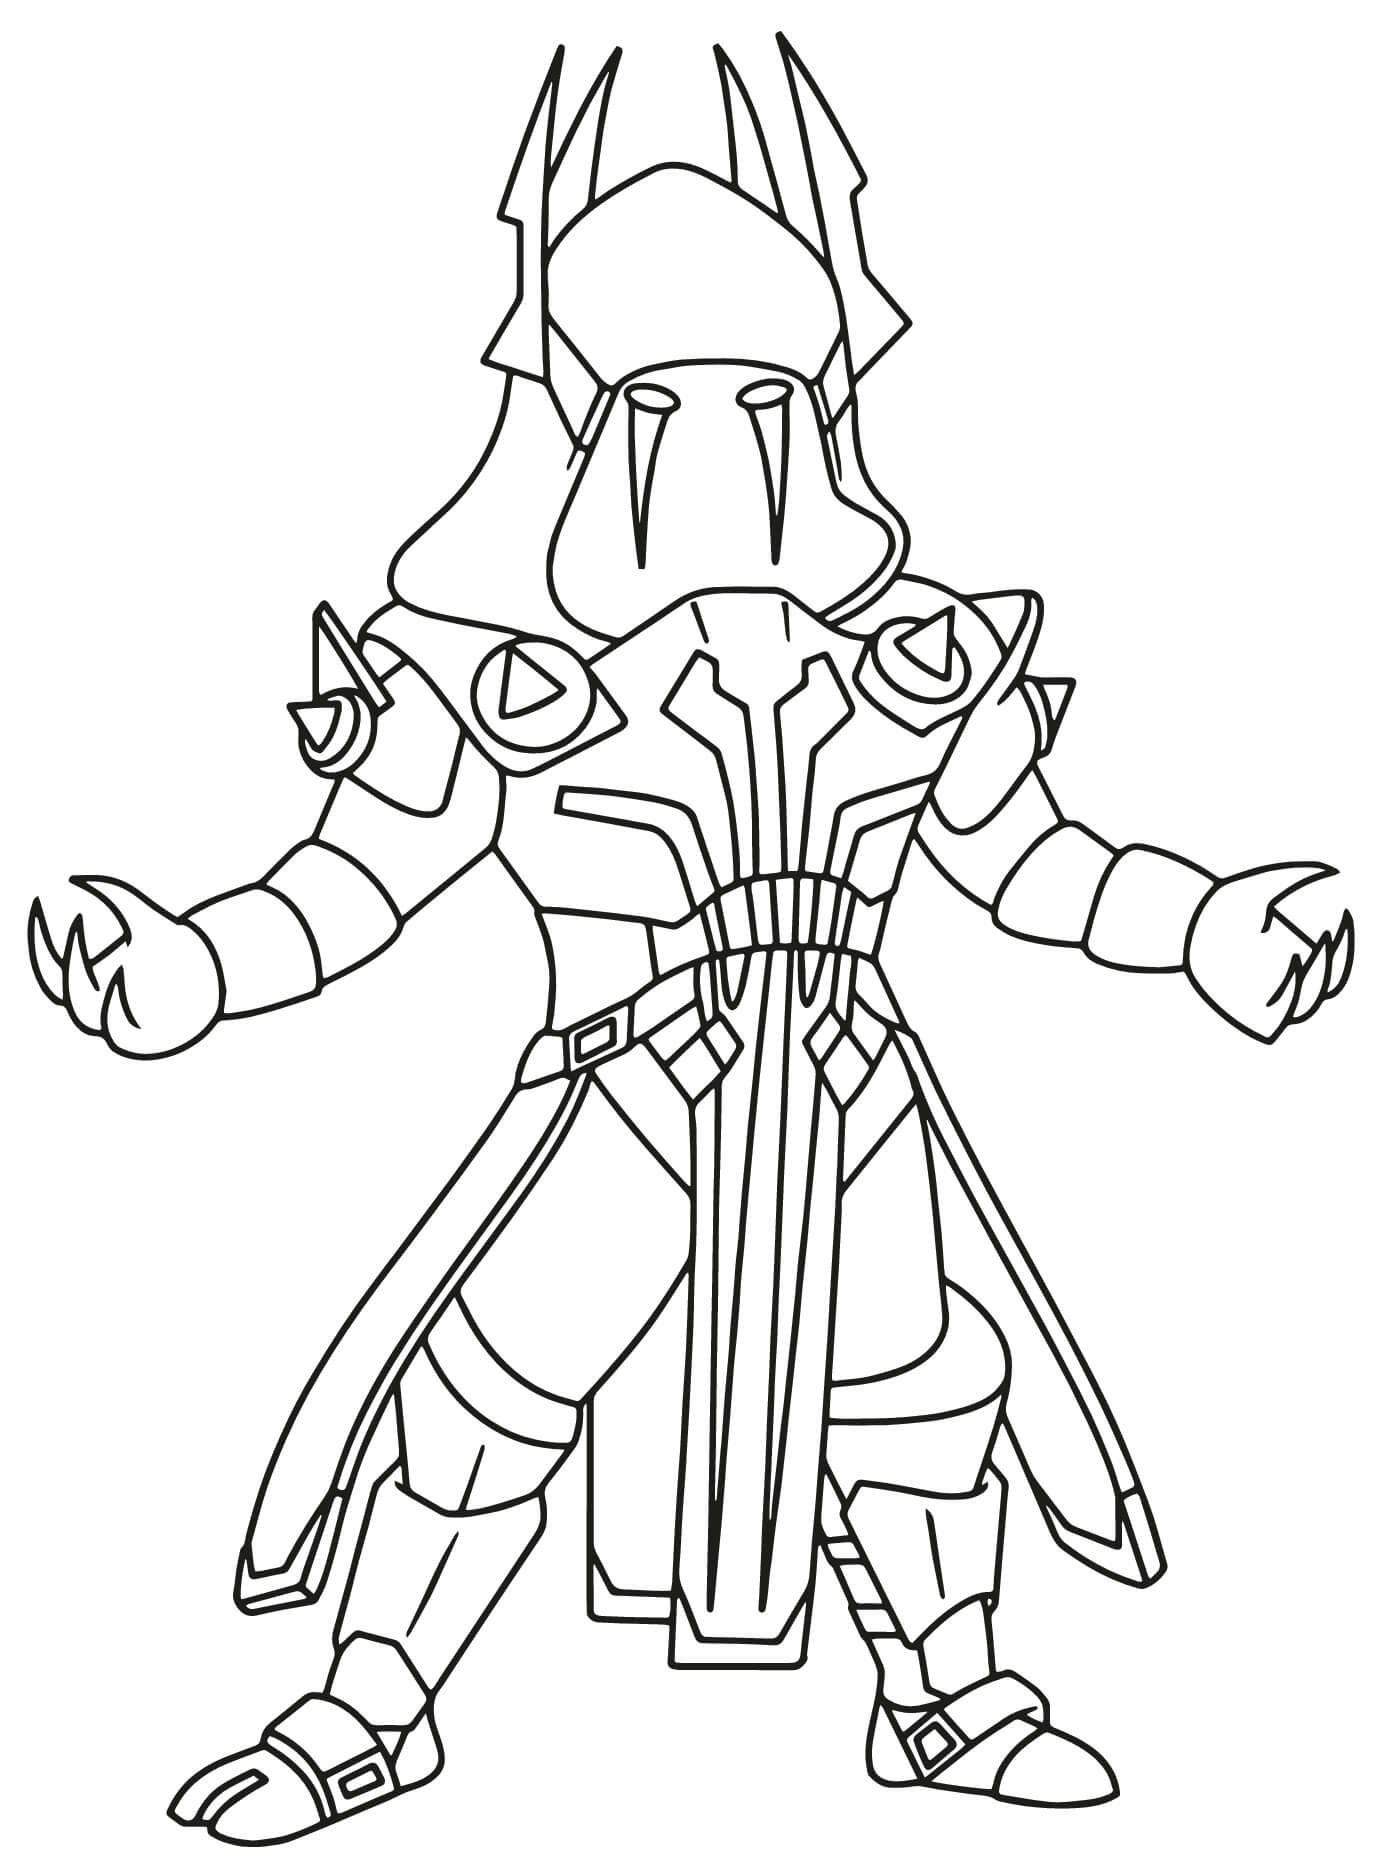 Ice King Coloring Page